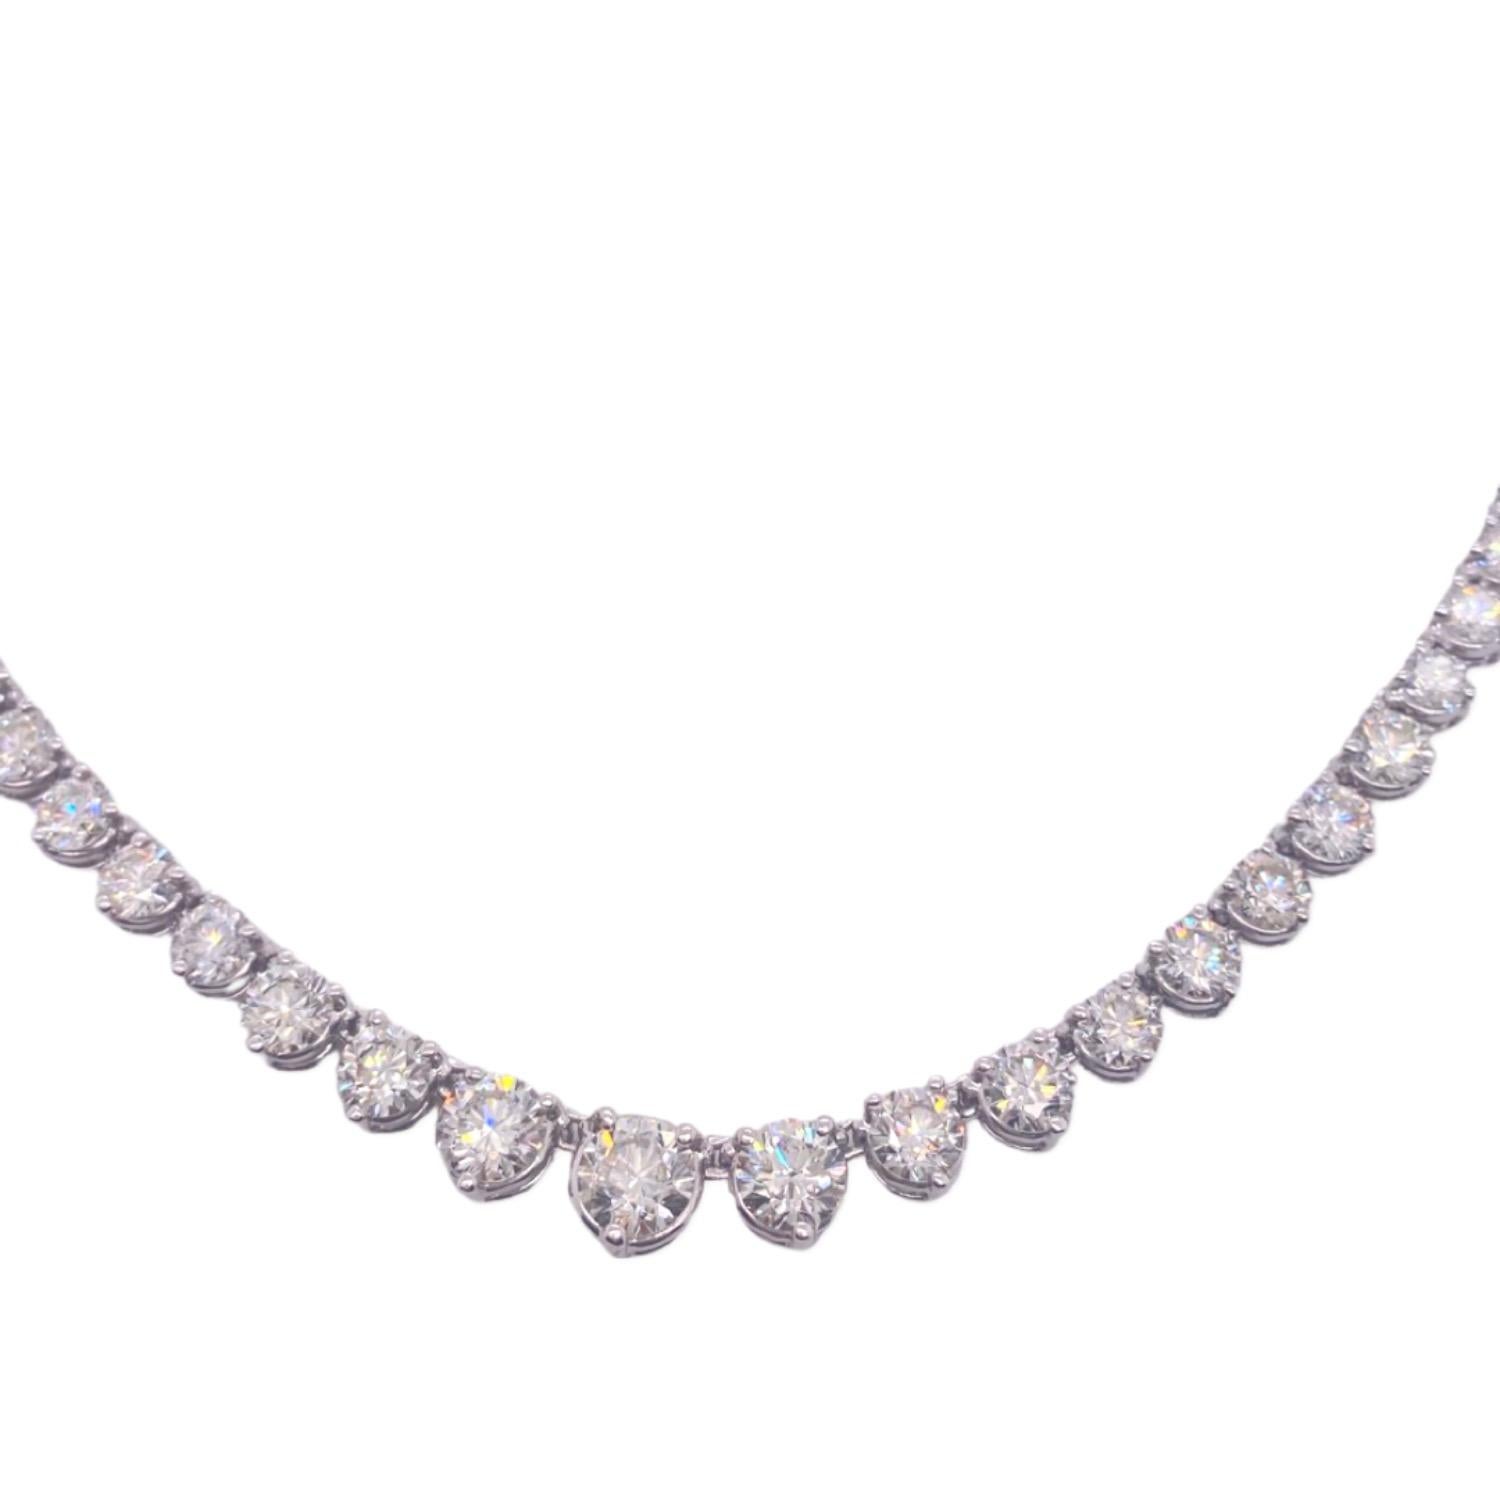 Diamond Riviera Necklace 7.00 tcw in 14kt White Gold 3